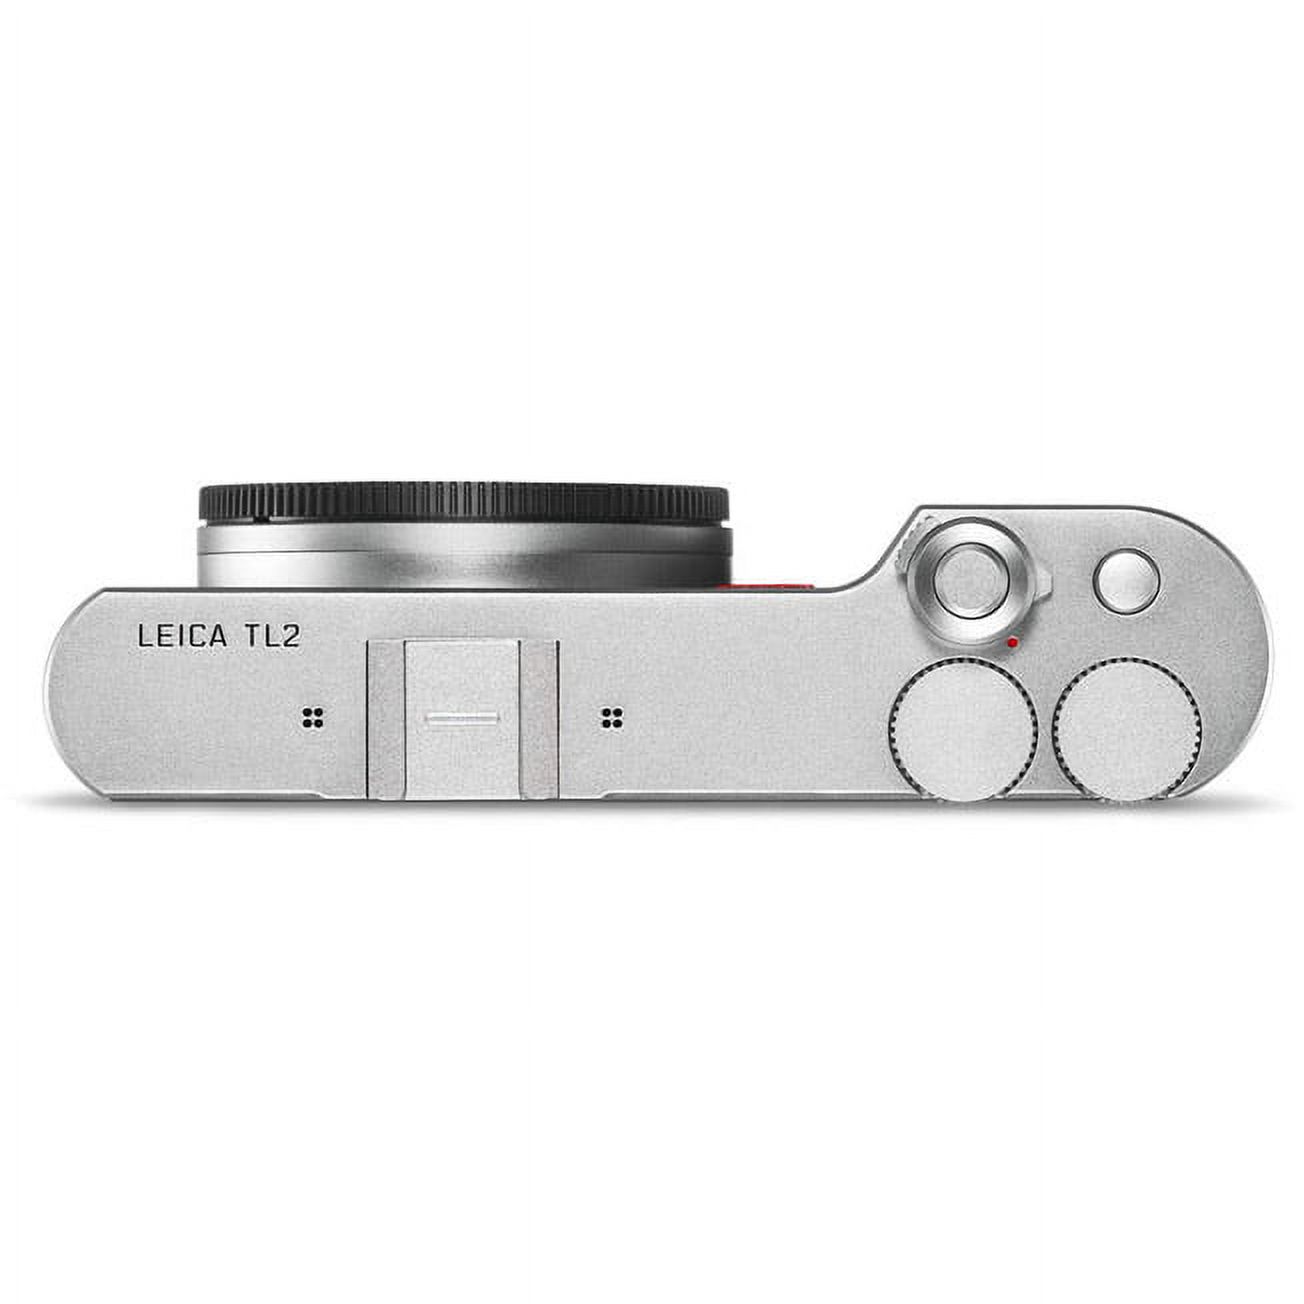 Leica L2 Mirrorless Digital Camera (Silver) - Master Landscape Photographer Kit - Memory Card - Accessories with Leica - image 3 of 6